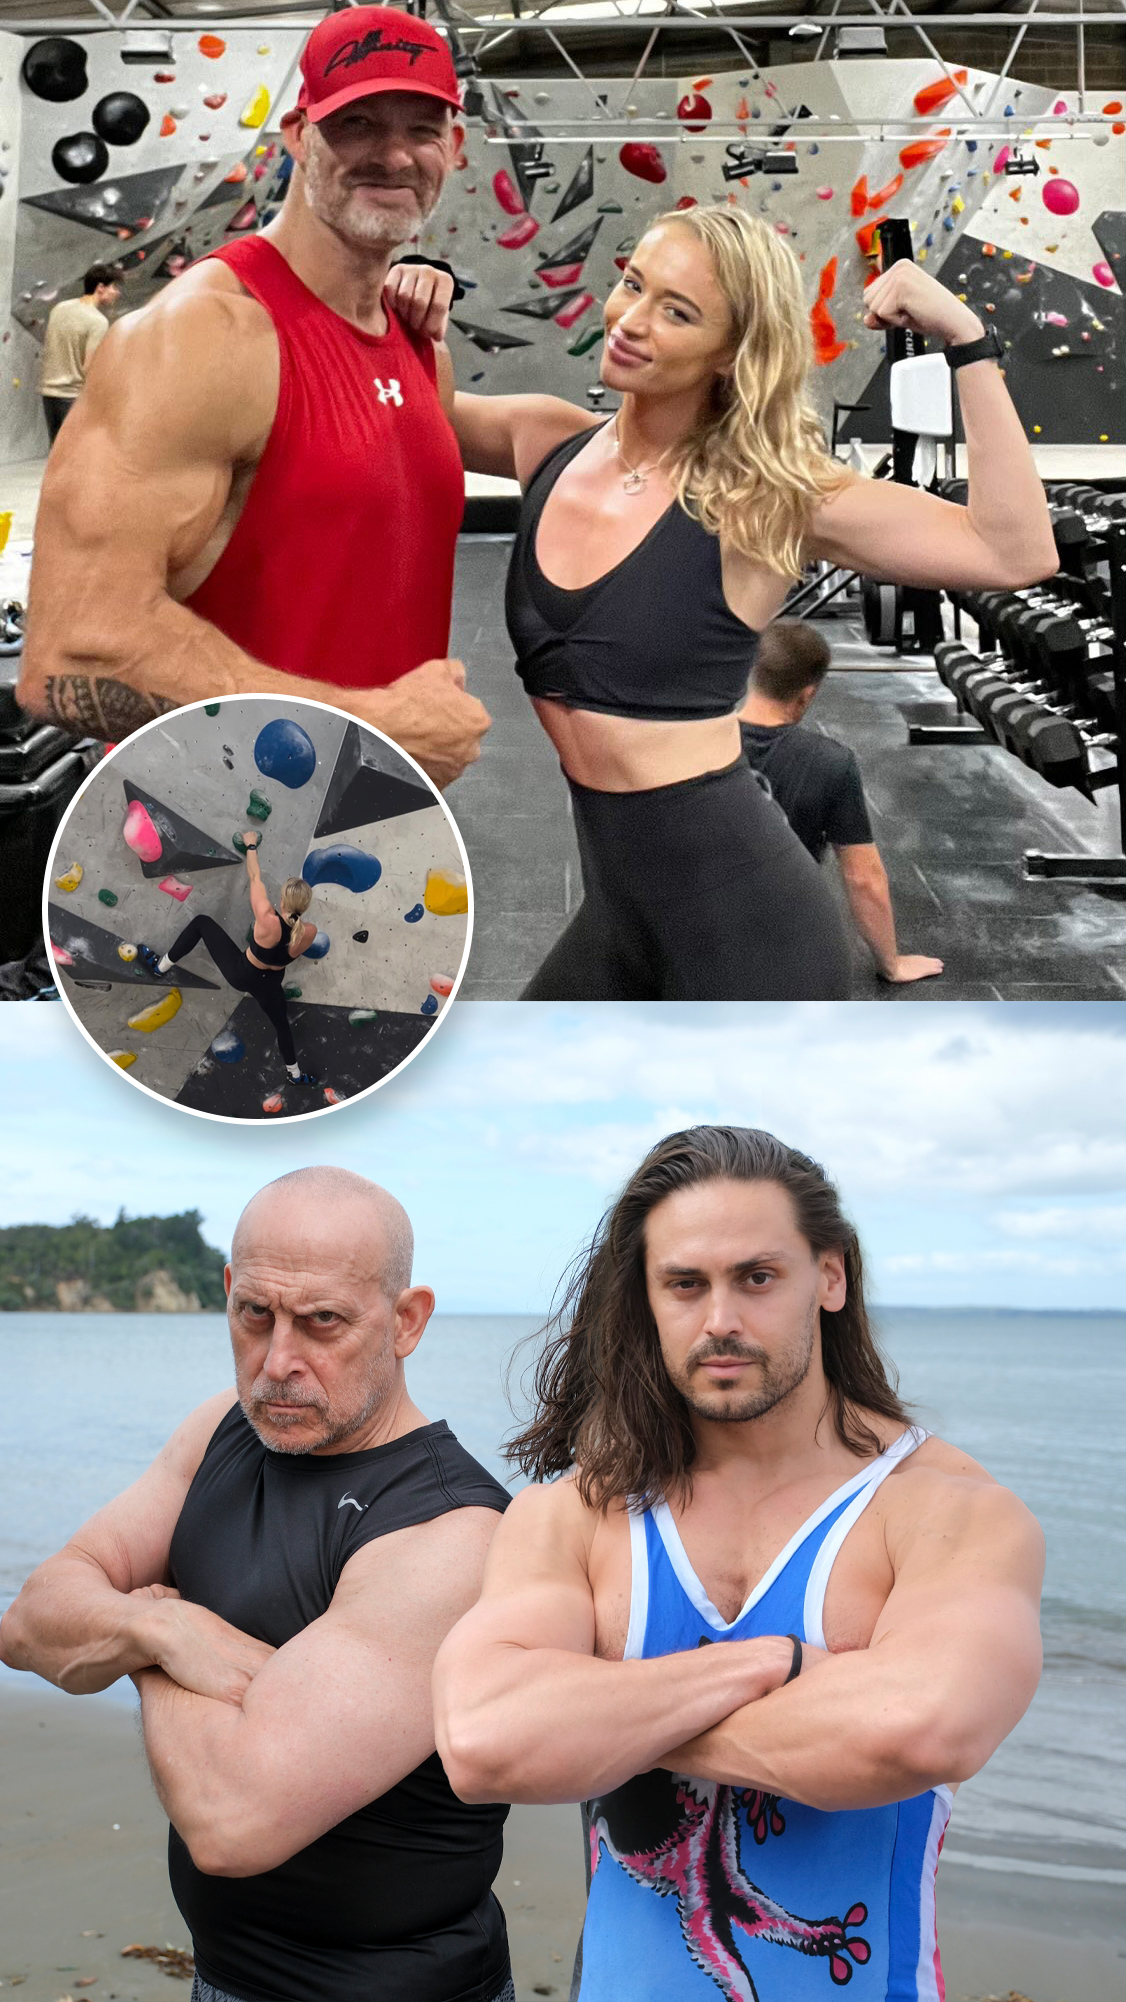 Top: Gladiator Hunter (James Crossley) training with Gladiator wannabe, Emily Diamond. Below: Wolf (Michael Van Wijk) and his son Dean